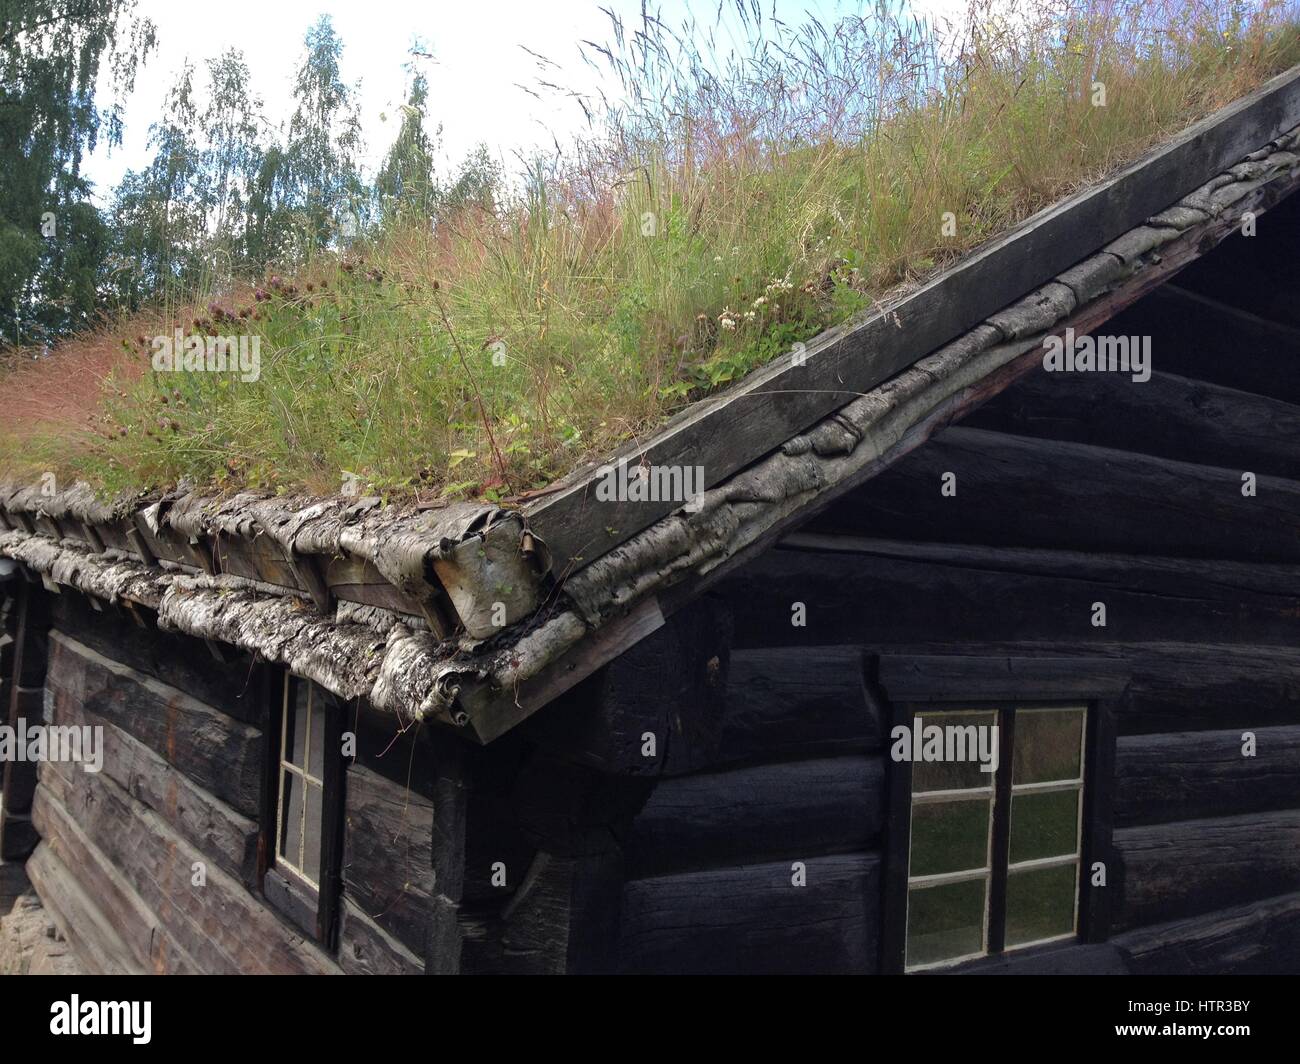 Detail of grass growing on roff on traditional wood housing in Norway.  Vernacular architecture in Norway.  Greenroof with natural grasses and plants. Stock Photo